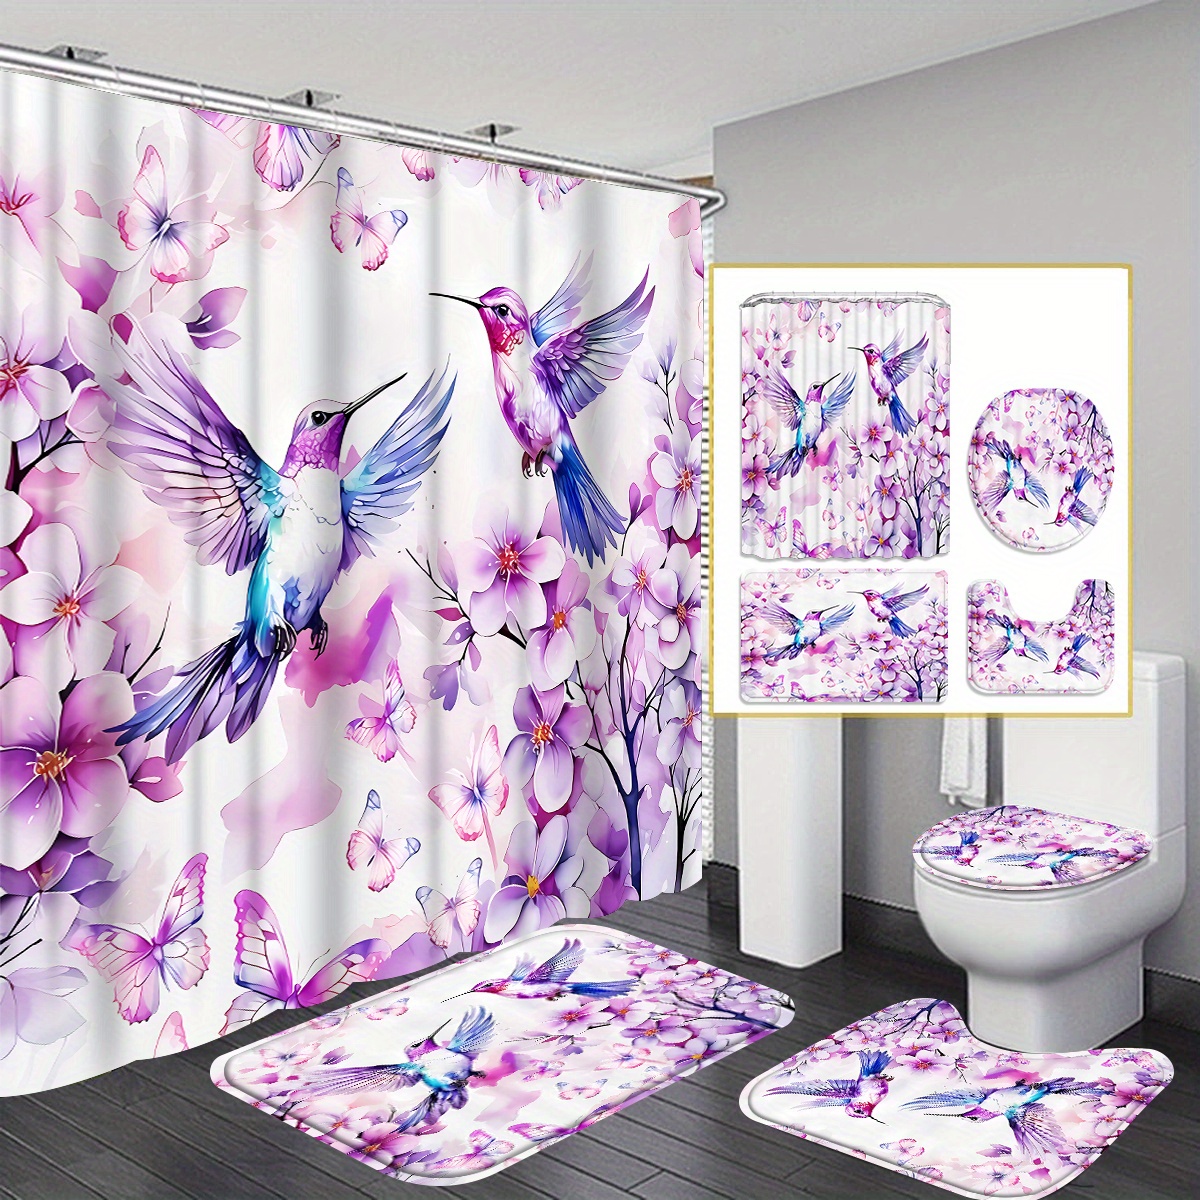 

4pcs Purple Flowers And Birds Shower Curtain Gift Modern Home Bathroom Decoration Curtain And Toilet Floor Mat 3-piece Set With 12 Shower Curtain Hooks